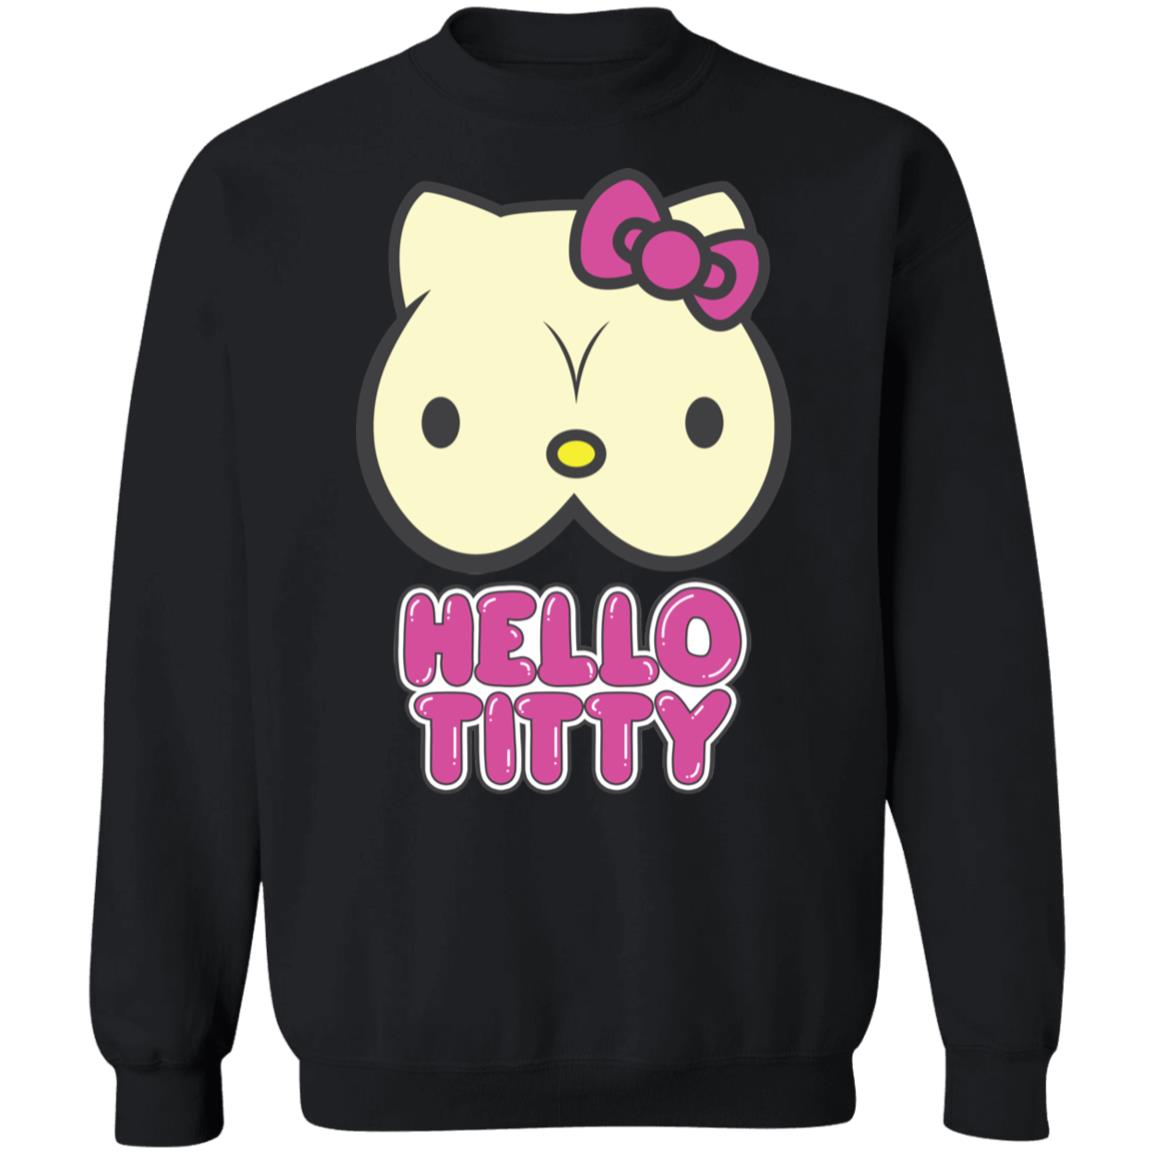 HELLO TITTY - men's t-shirt from FUNNY collection